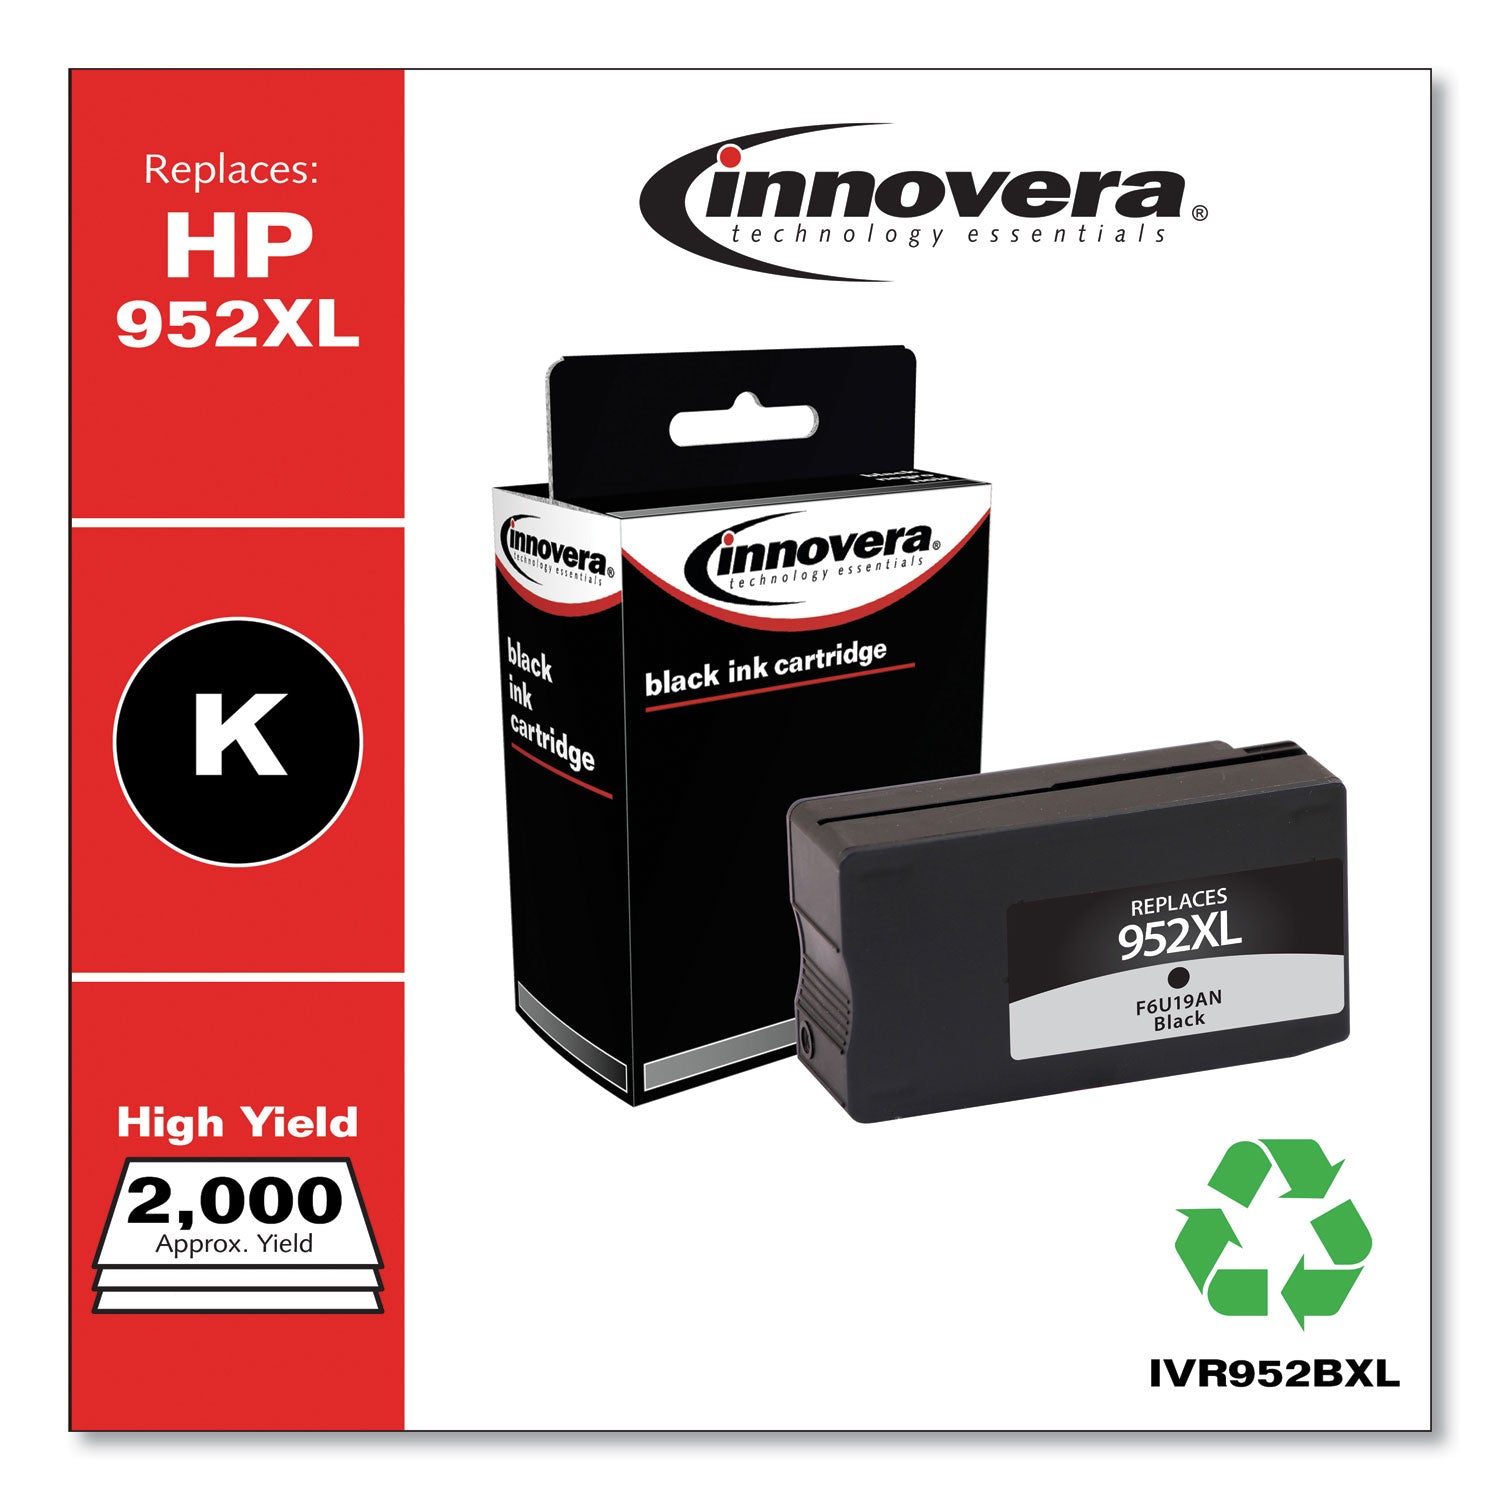 remanufactured-black-high-yield-ink-replacement-for-952xl-f6u19an-2000-page-yield_ivr952bxl - 2